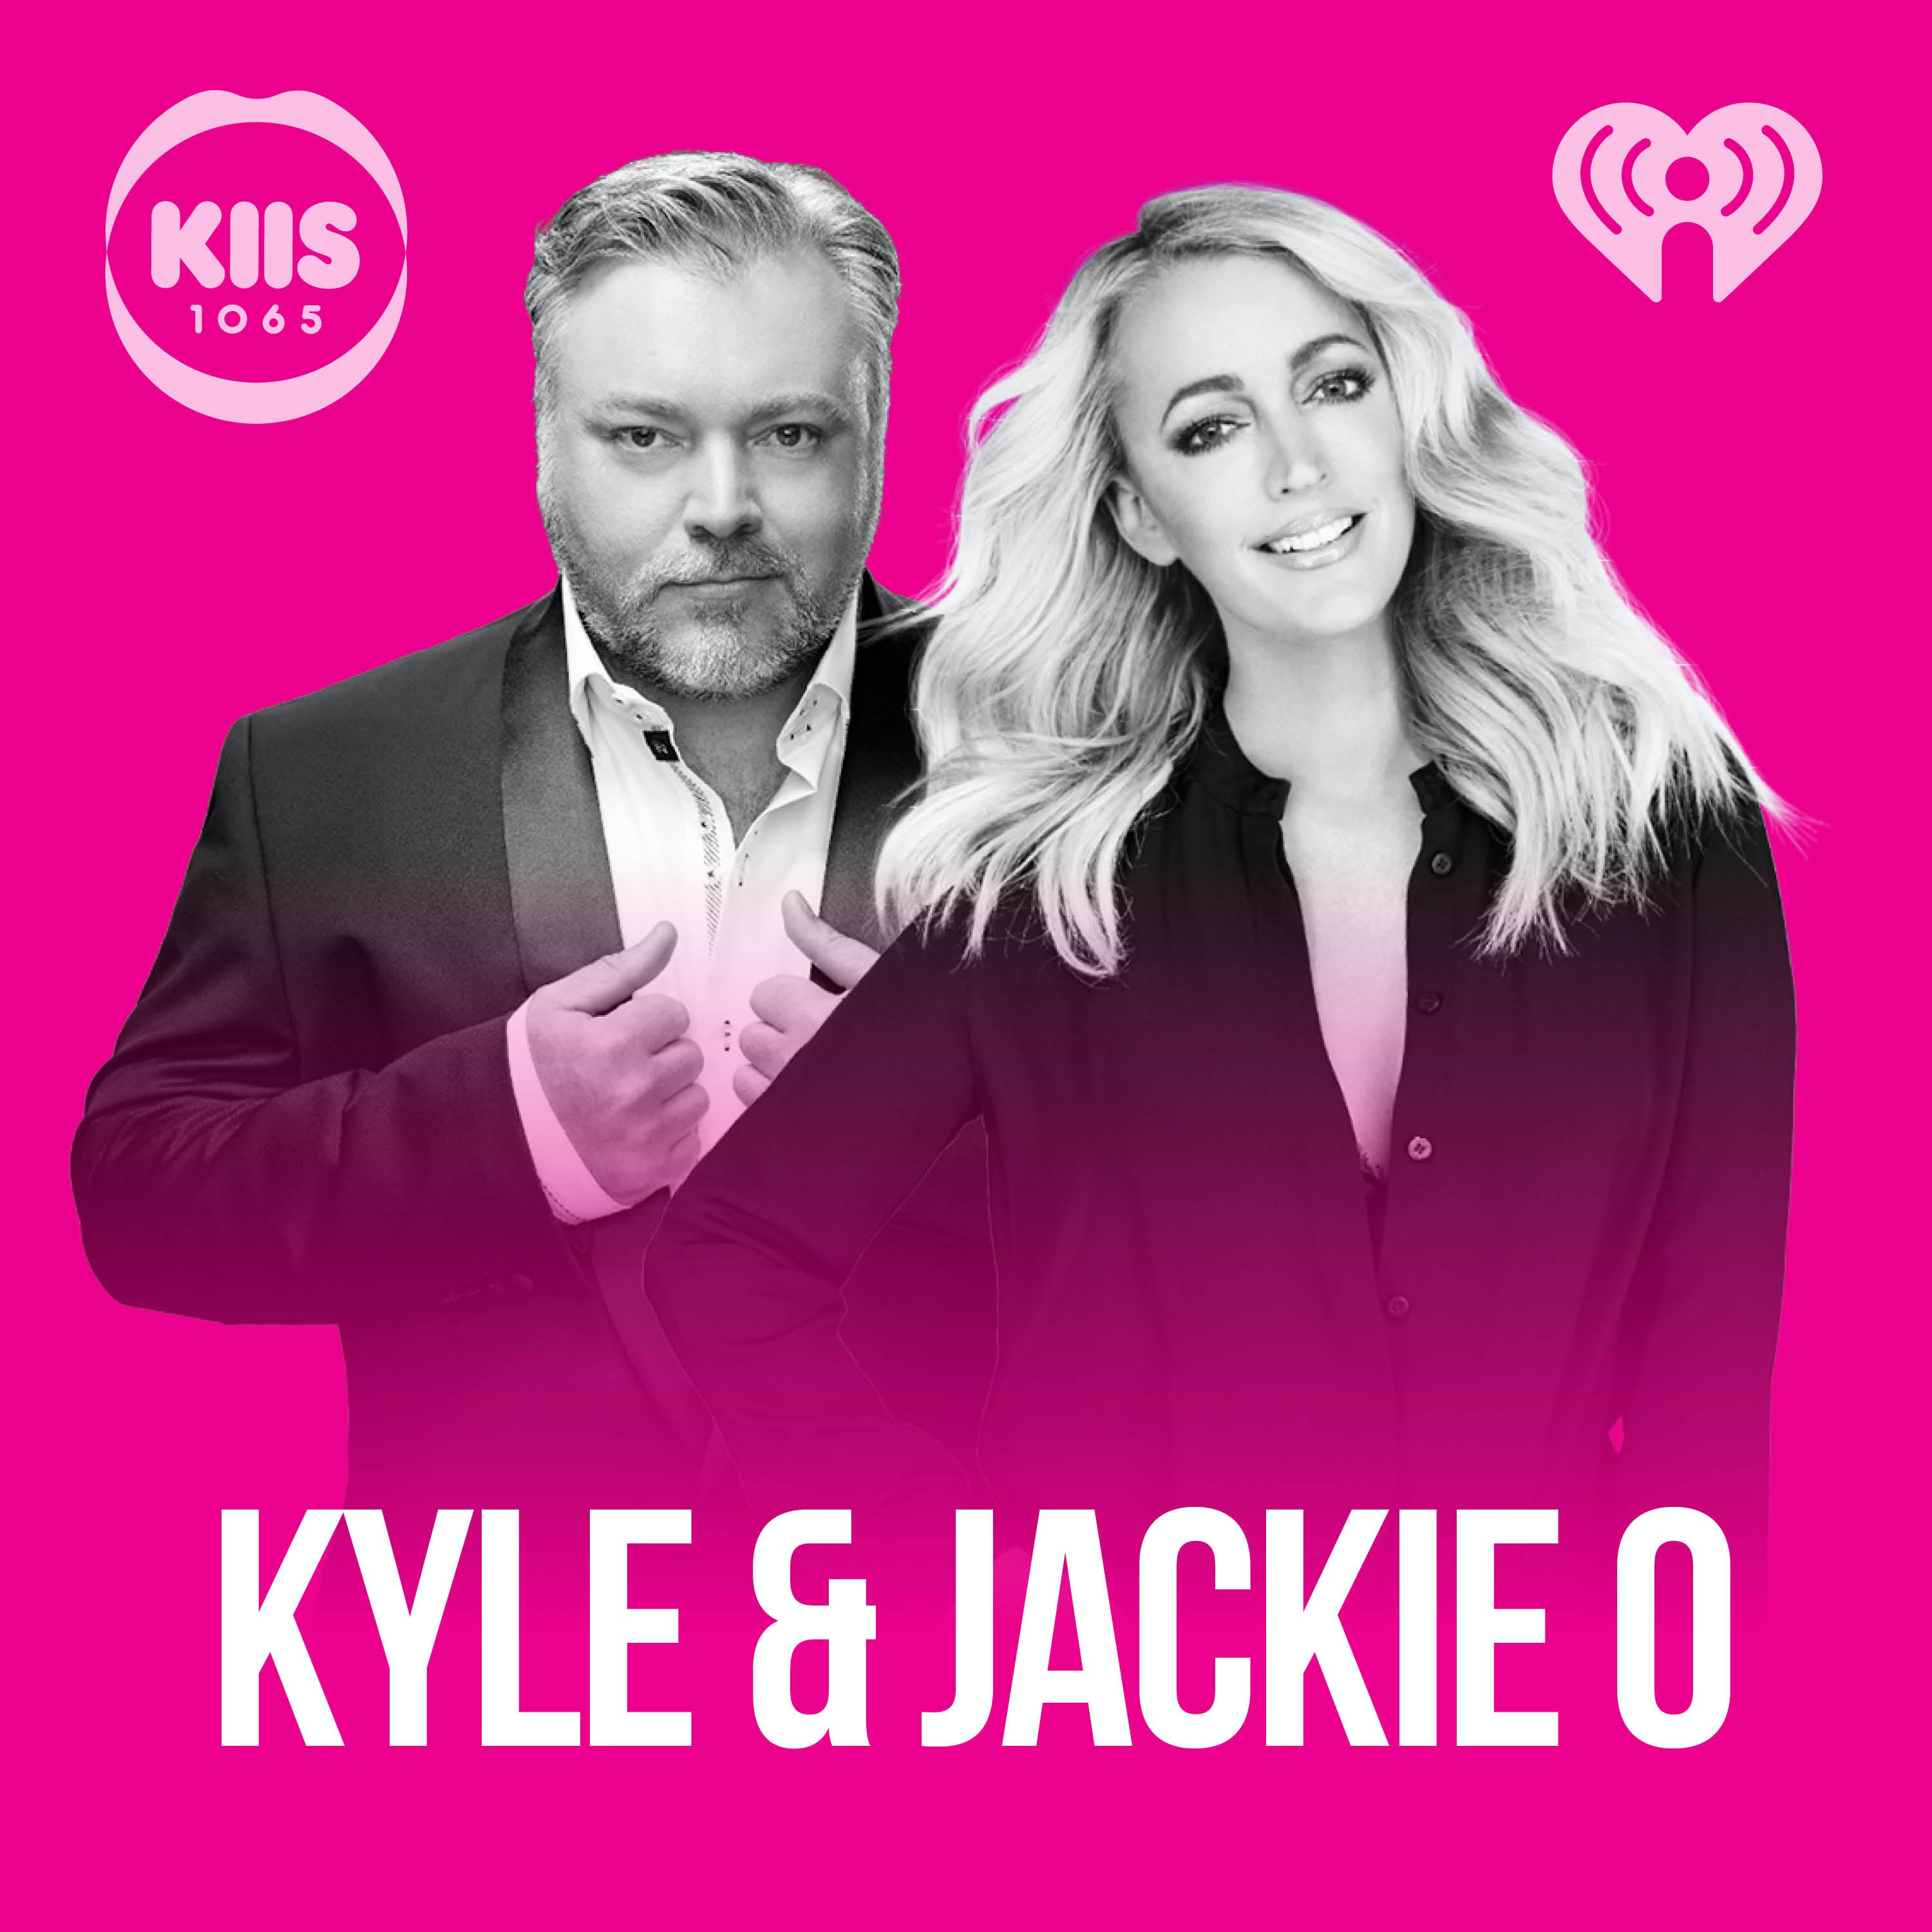 14/11/18 - The Kyle and Jackie O Show #982